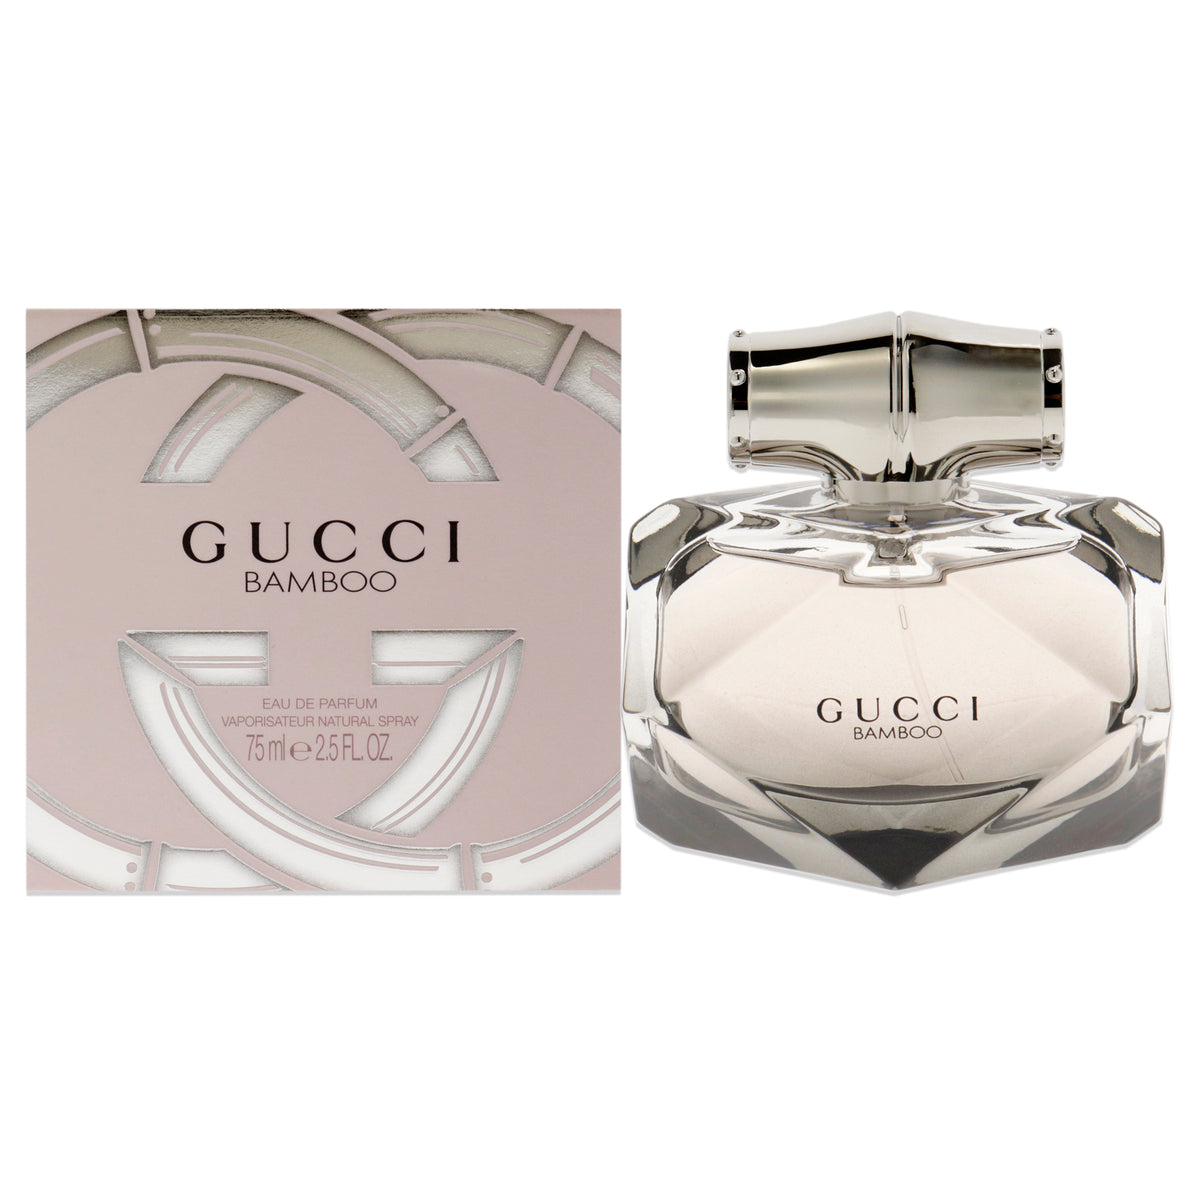 Gucci Bamboo by Gucci for Women - 2.5 oz EDP Spray